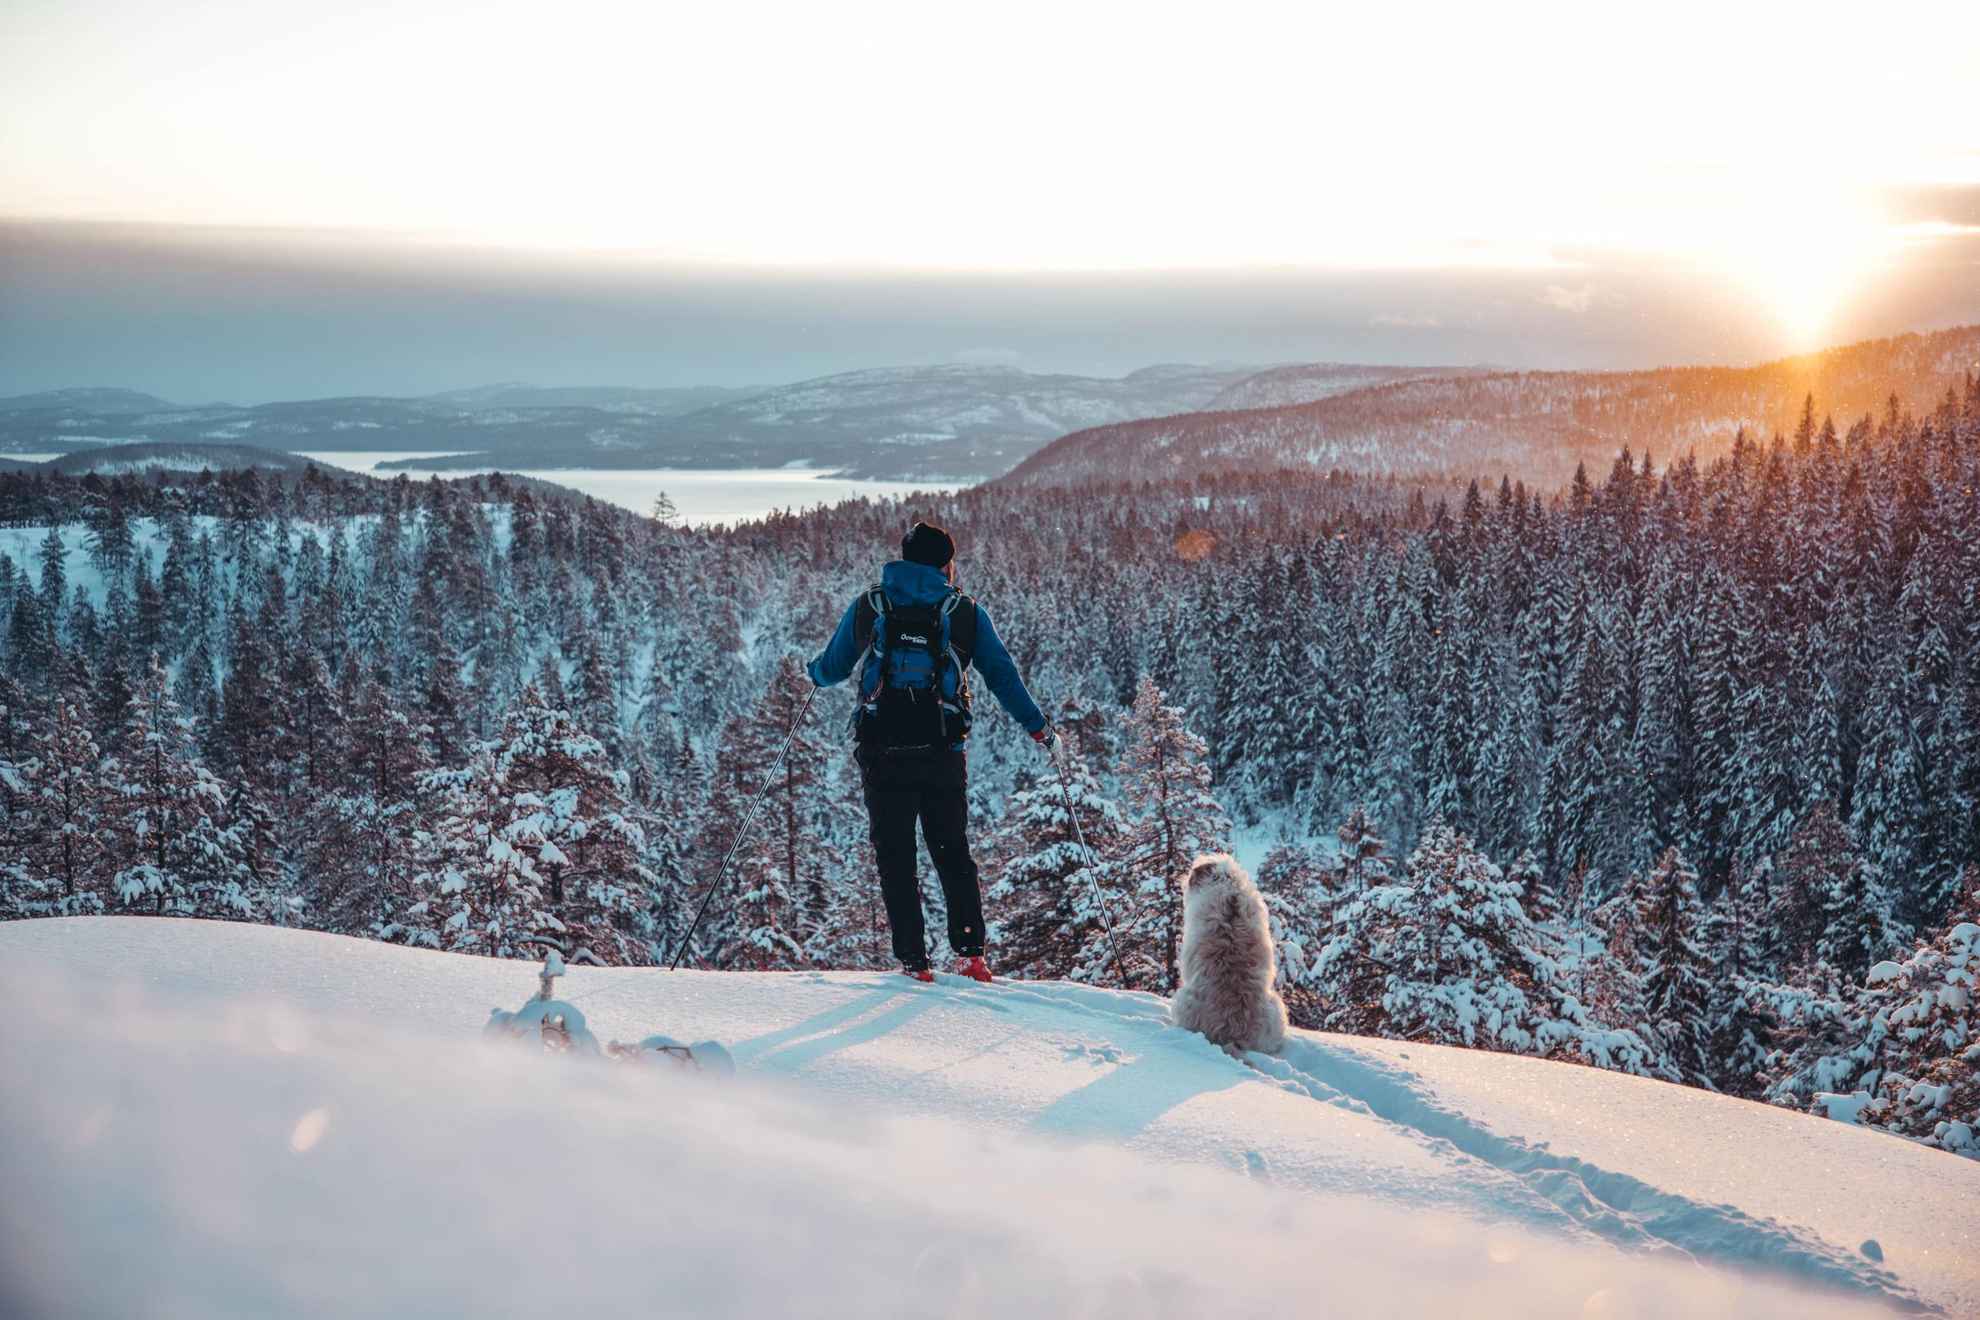 A person on skis with a dog on a mountain, looking out over forest and hills at the high coast.